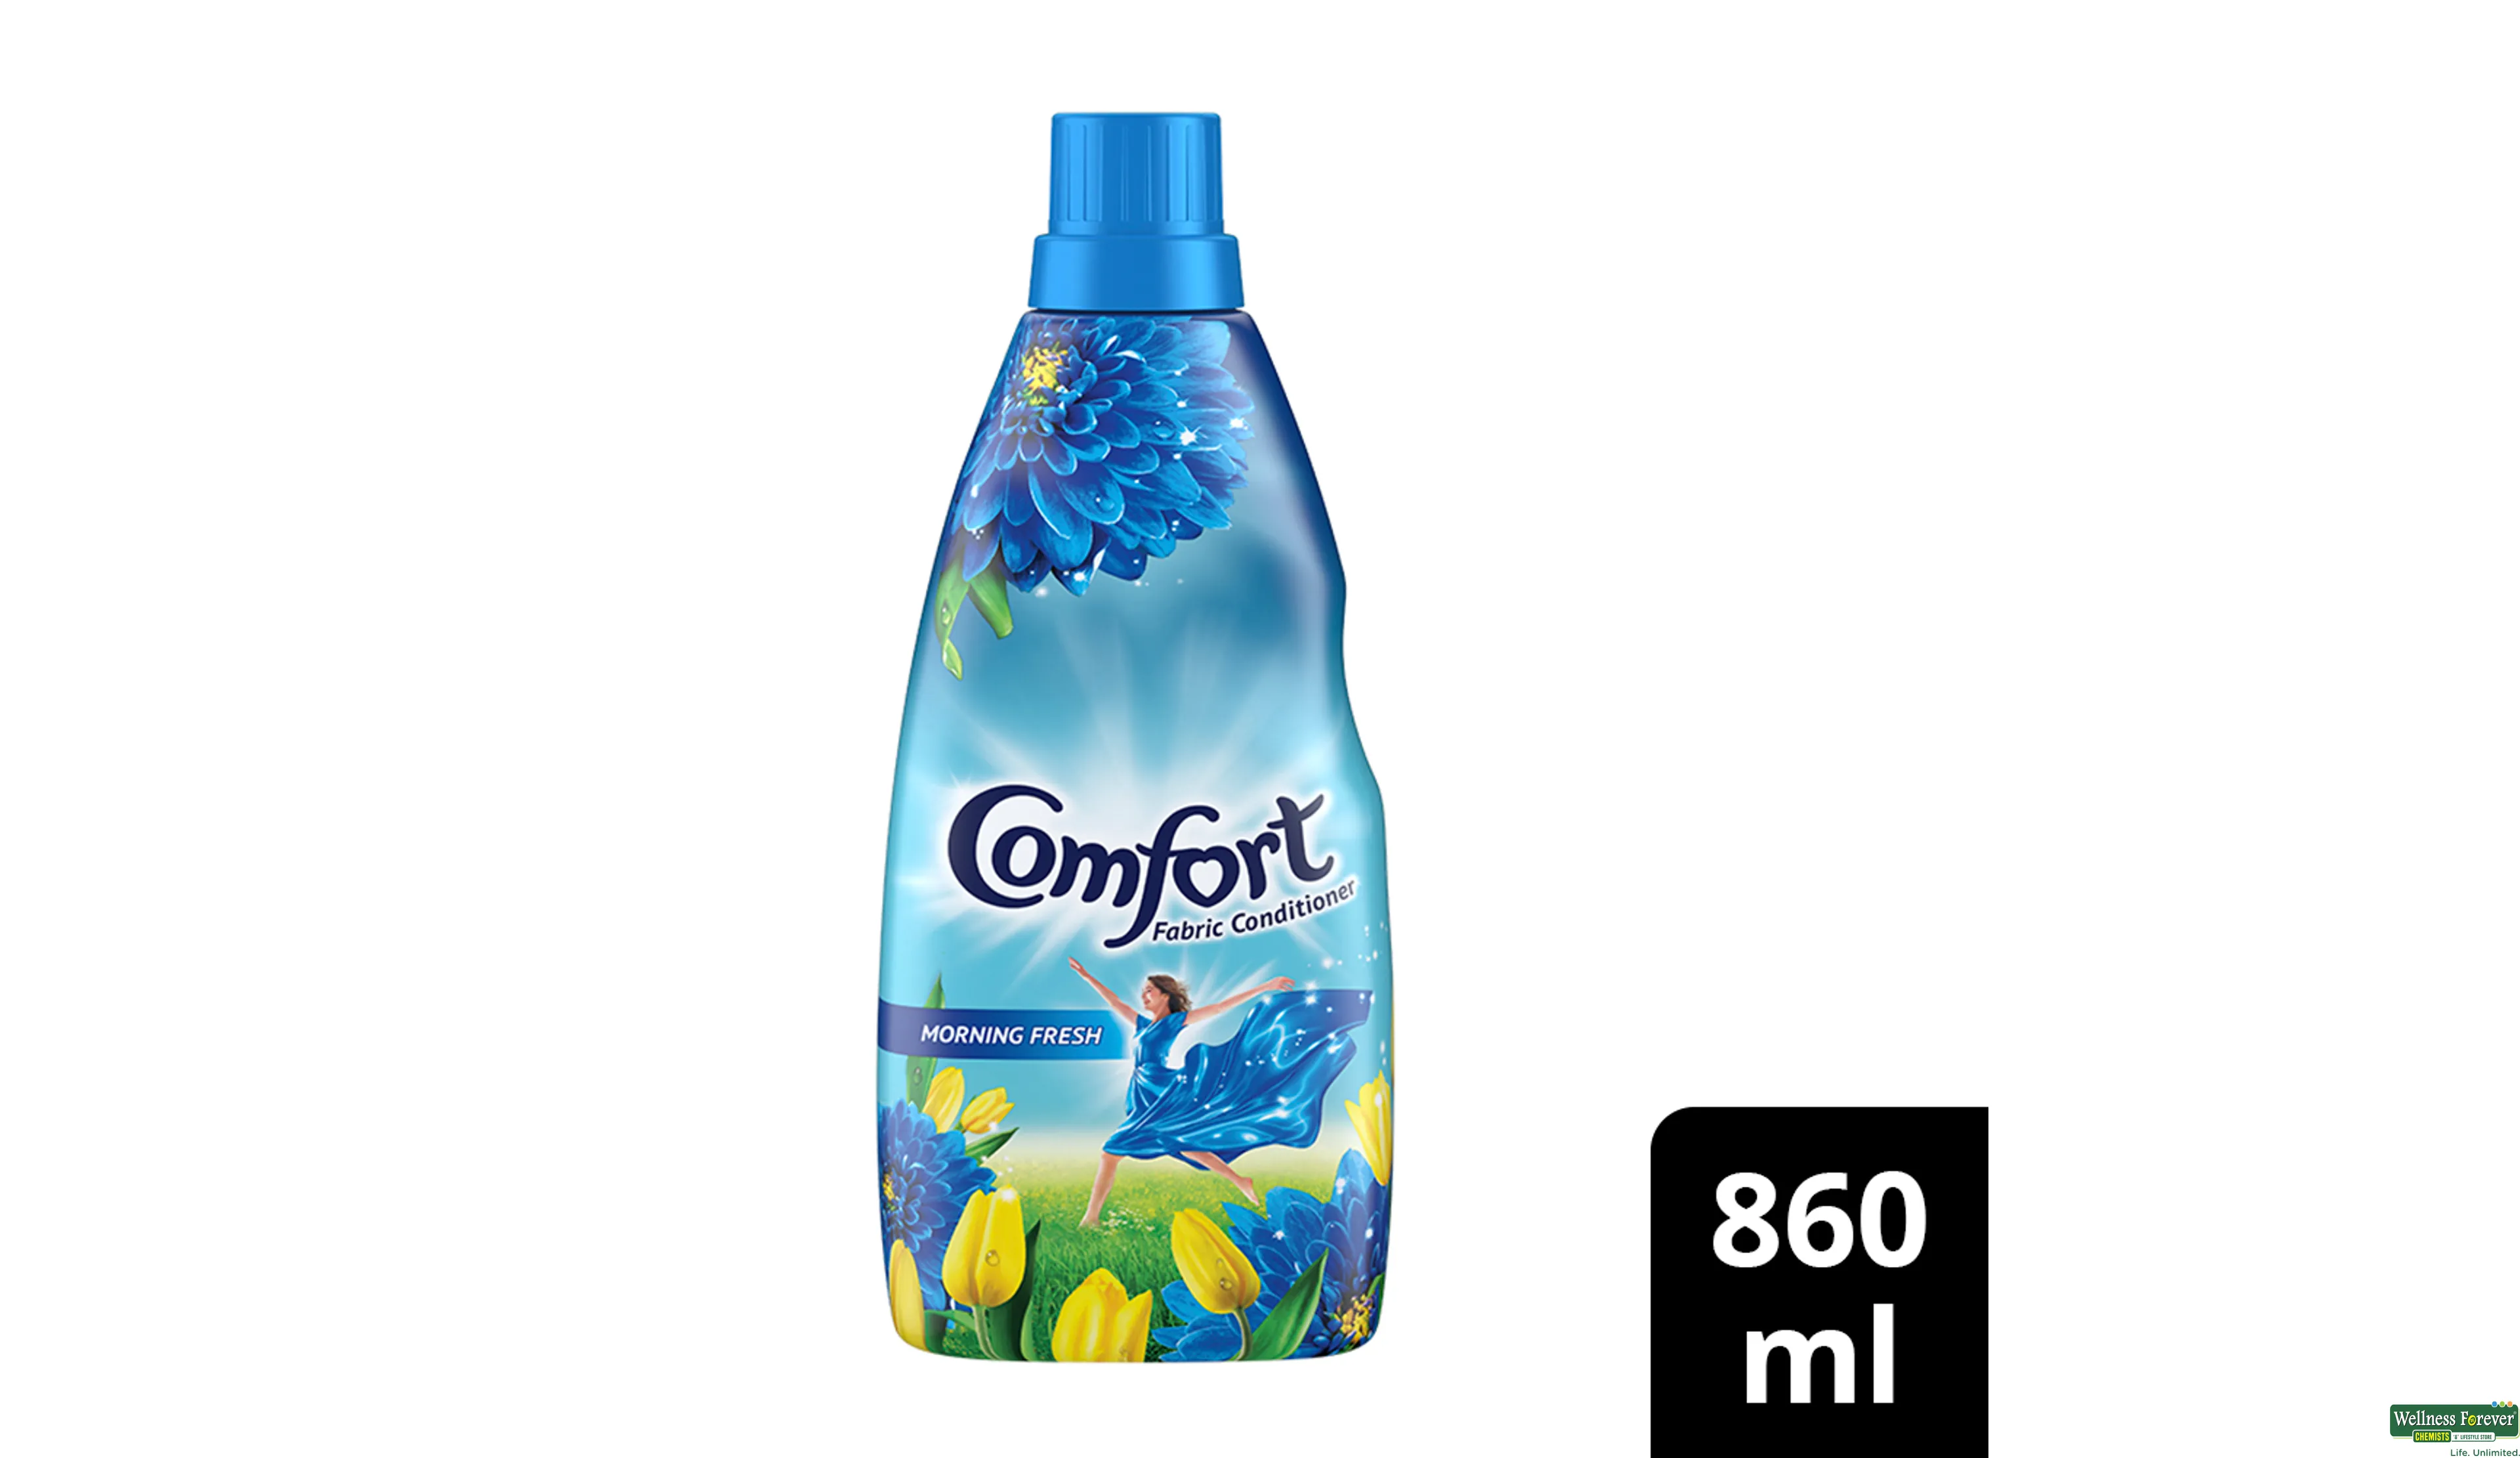 COMFORT FAB/COND AFTER WASH BLUE 860ML- 1, 860ML, null